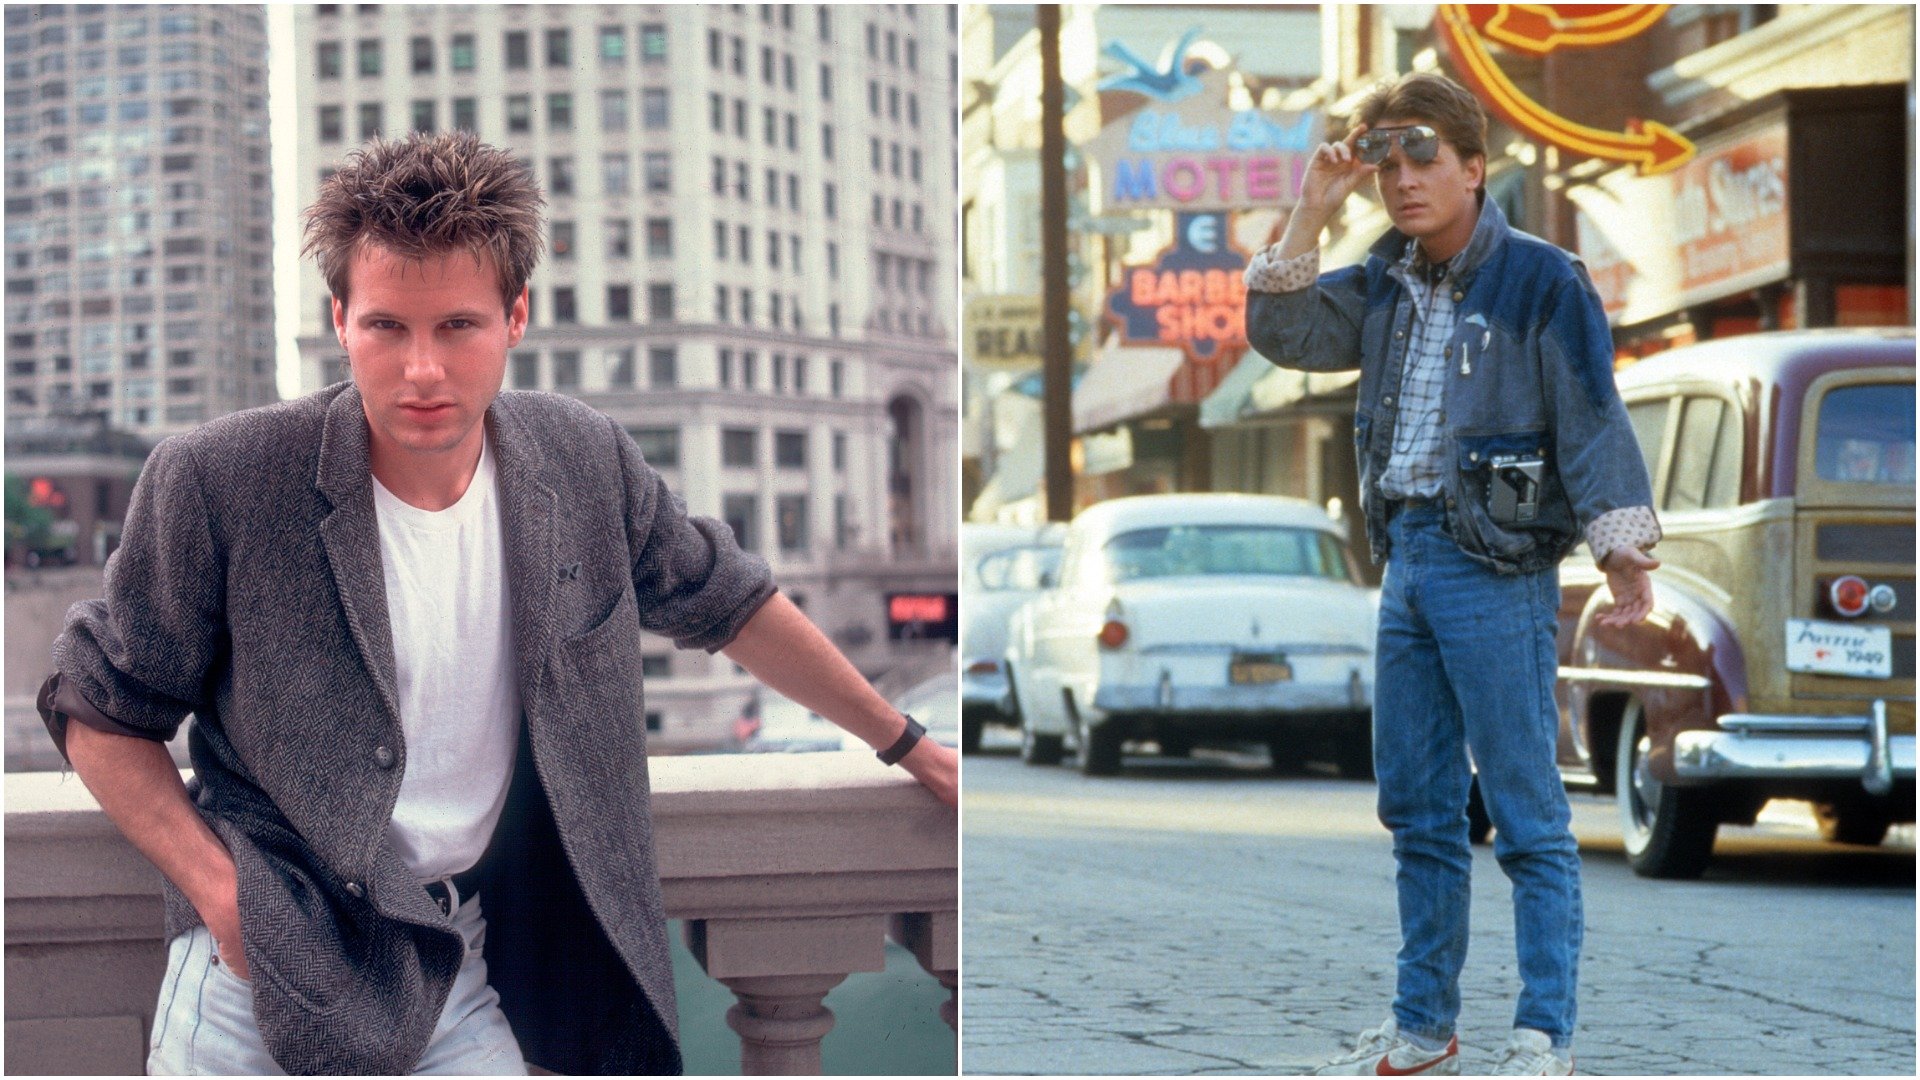 Corey Hart poses for a promotional photo in 1984. Michael J. Fox pulls the sunglasses above his eyes in a shot from 'Back to the Future.'